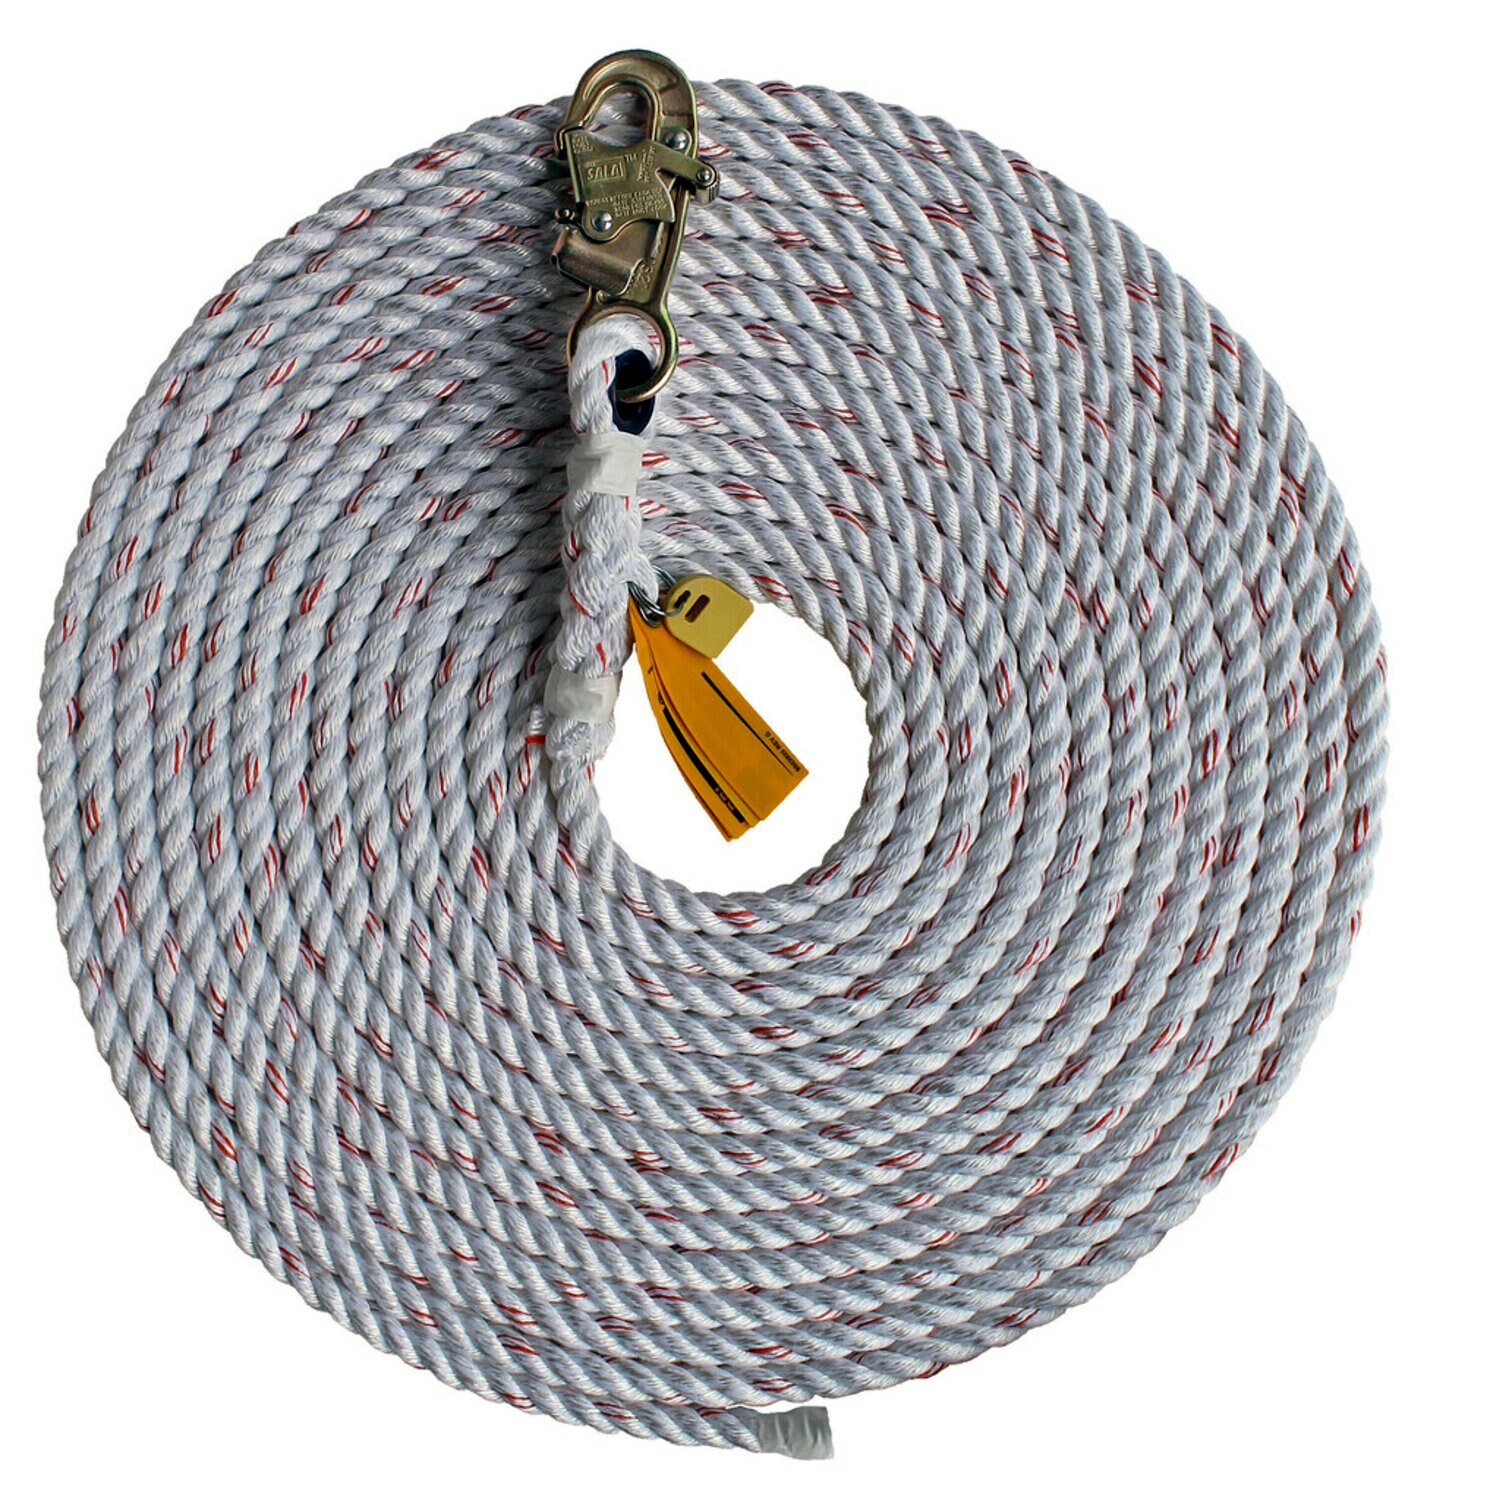 7012798792 - 3M DBI-SALA Rope Lifeline with Snap Hook 1202900, 5/8 in Polyester and Polypropylene Blend, White, 200 ft